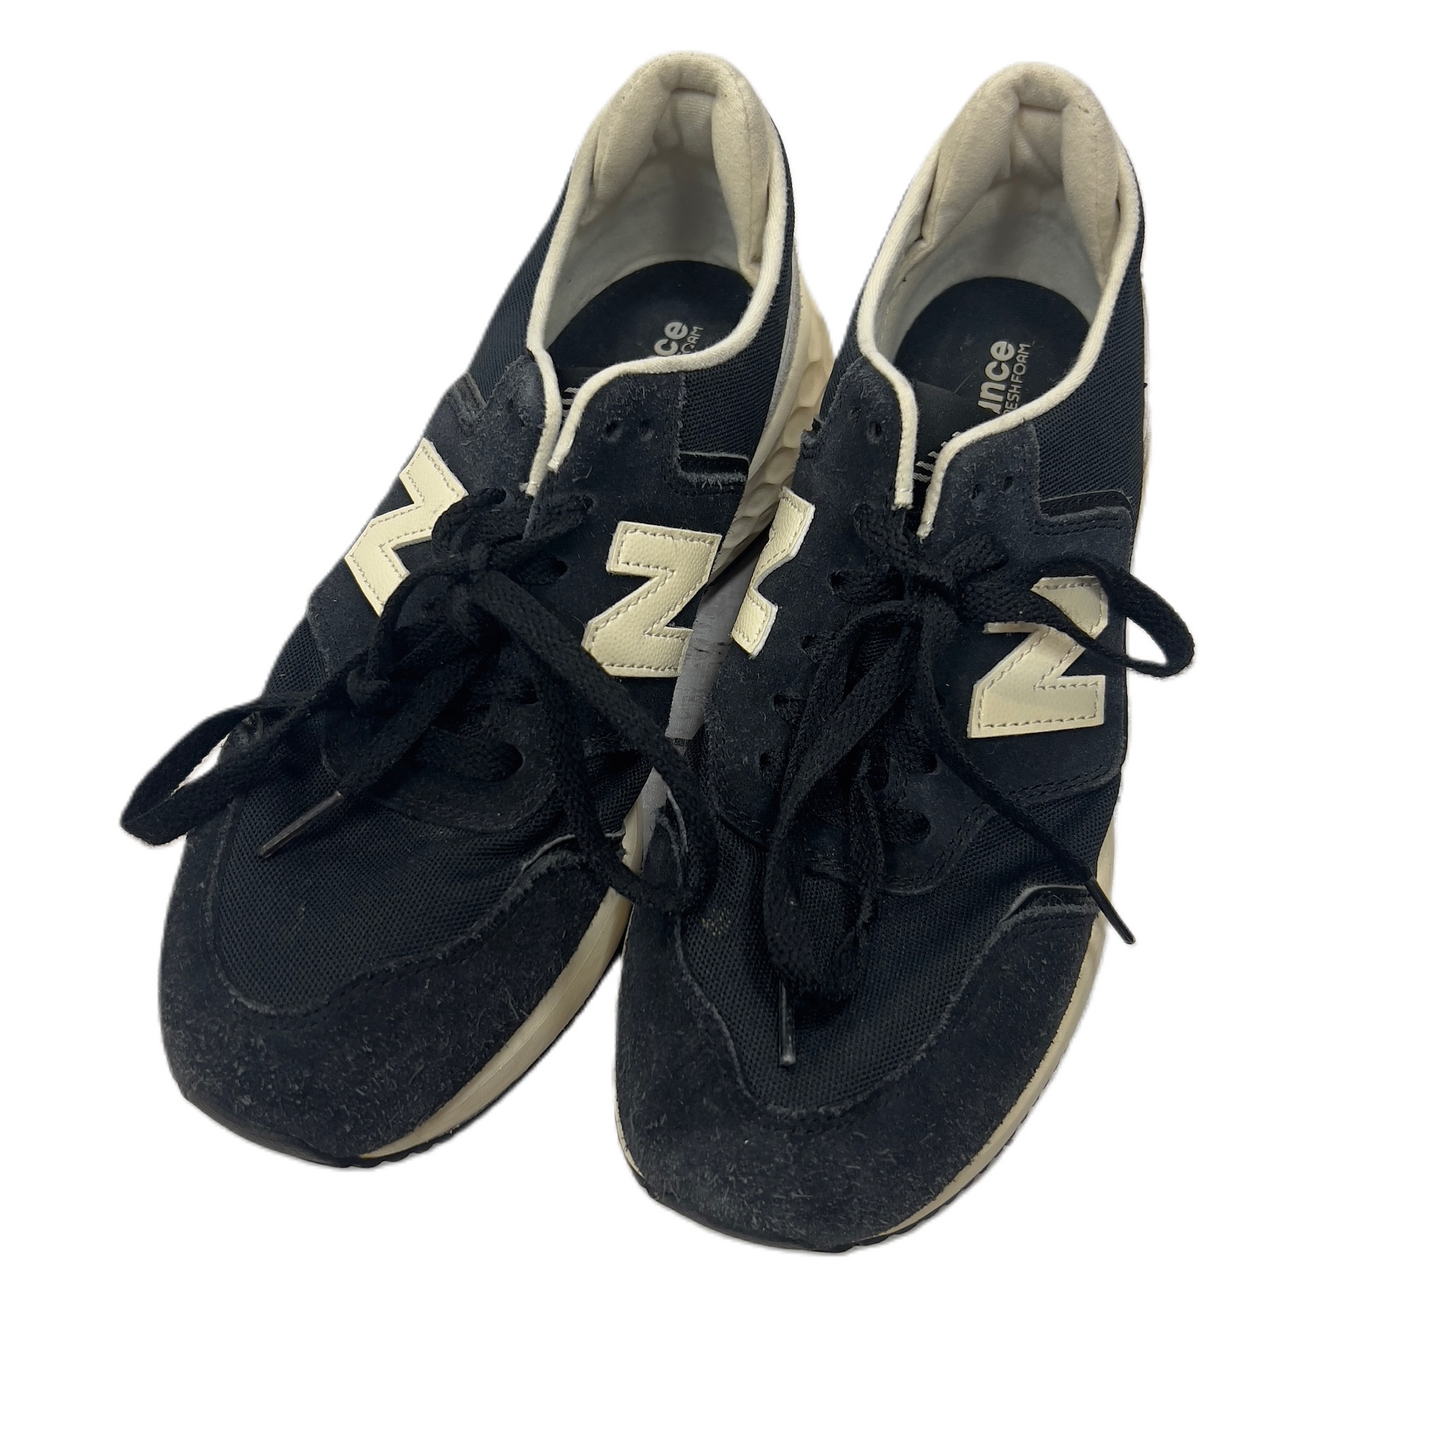 Black Shoes Athletic By New Balance, Size: 8.5